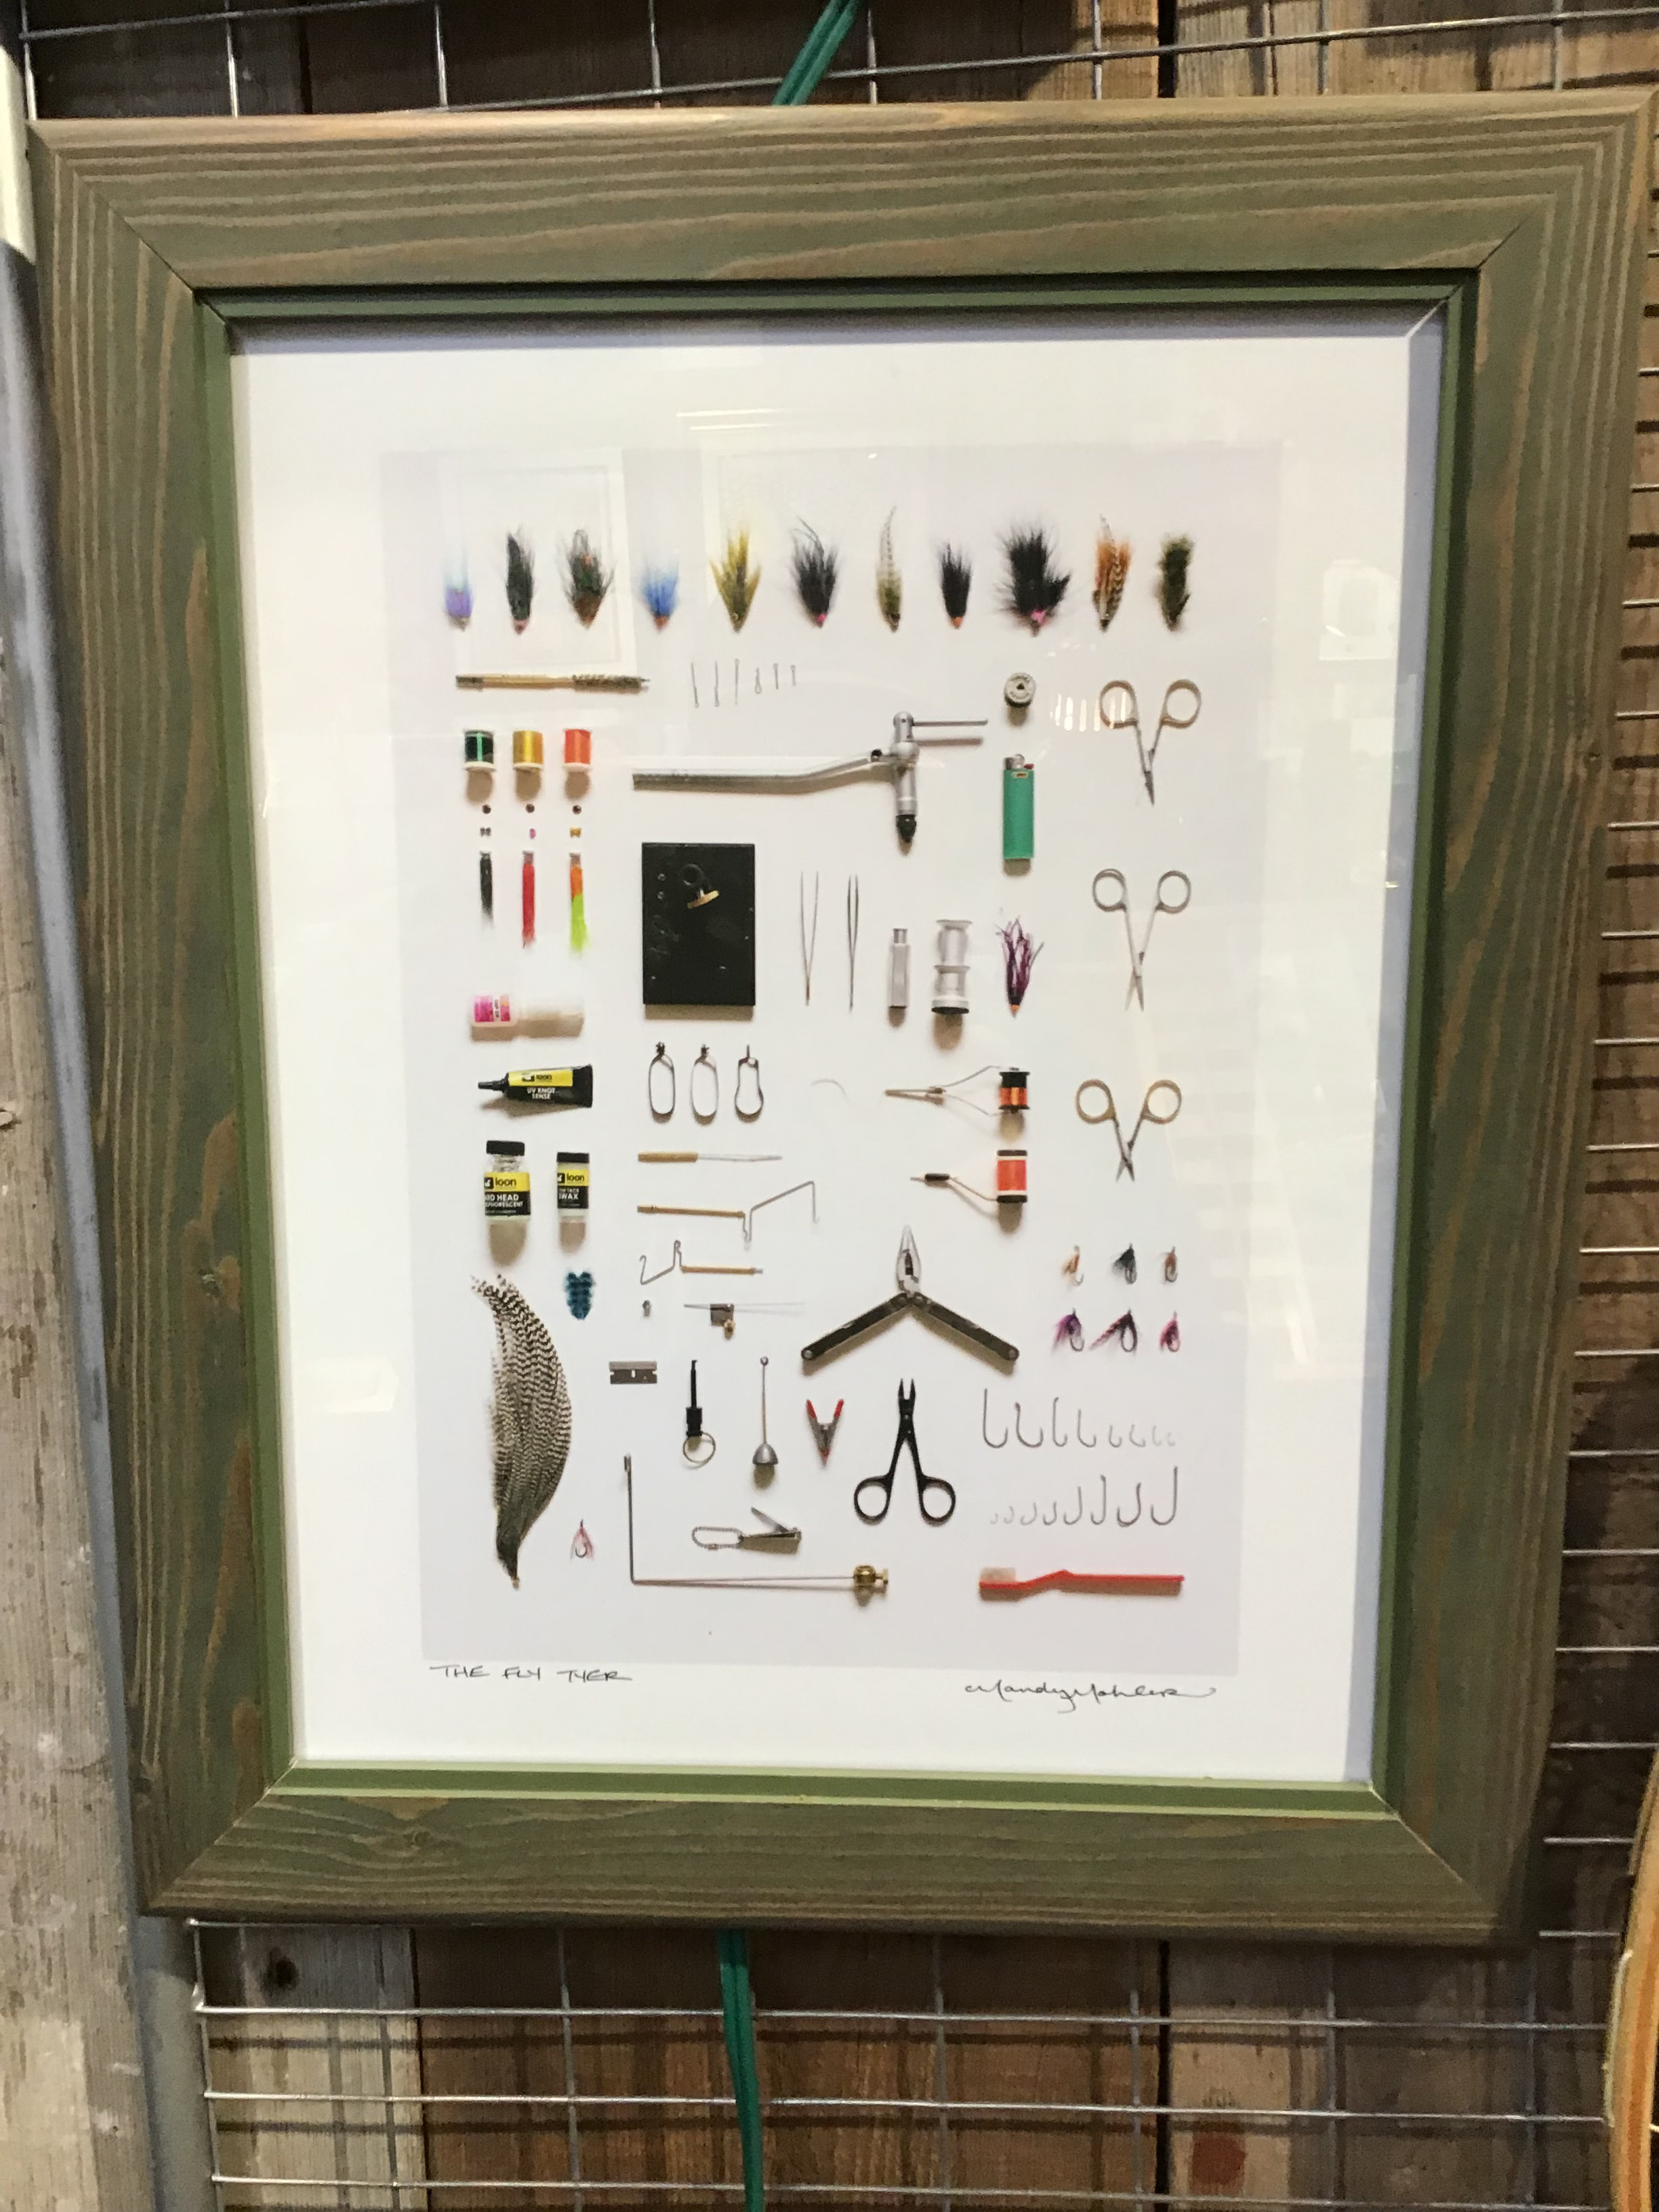 Fly fishing, tying and camping items signed and numbered prints by Mandy  Mohler